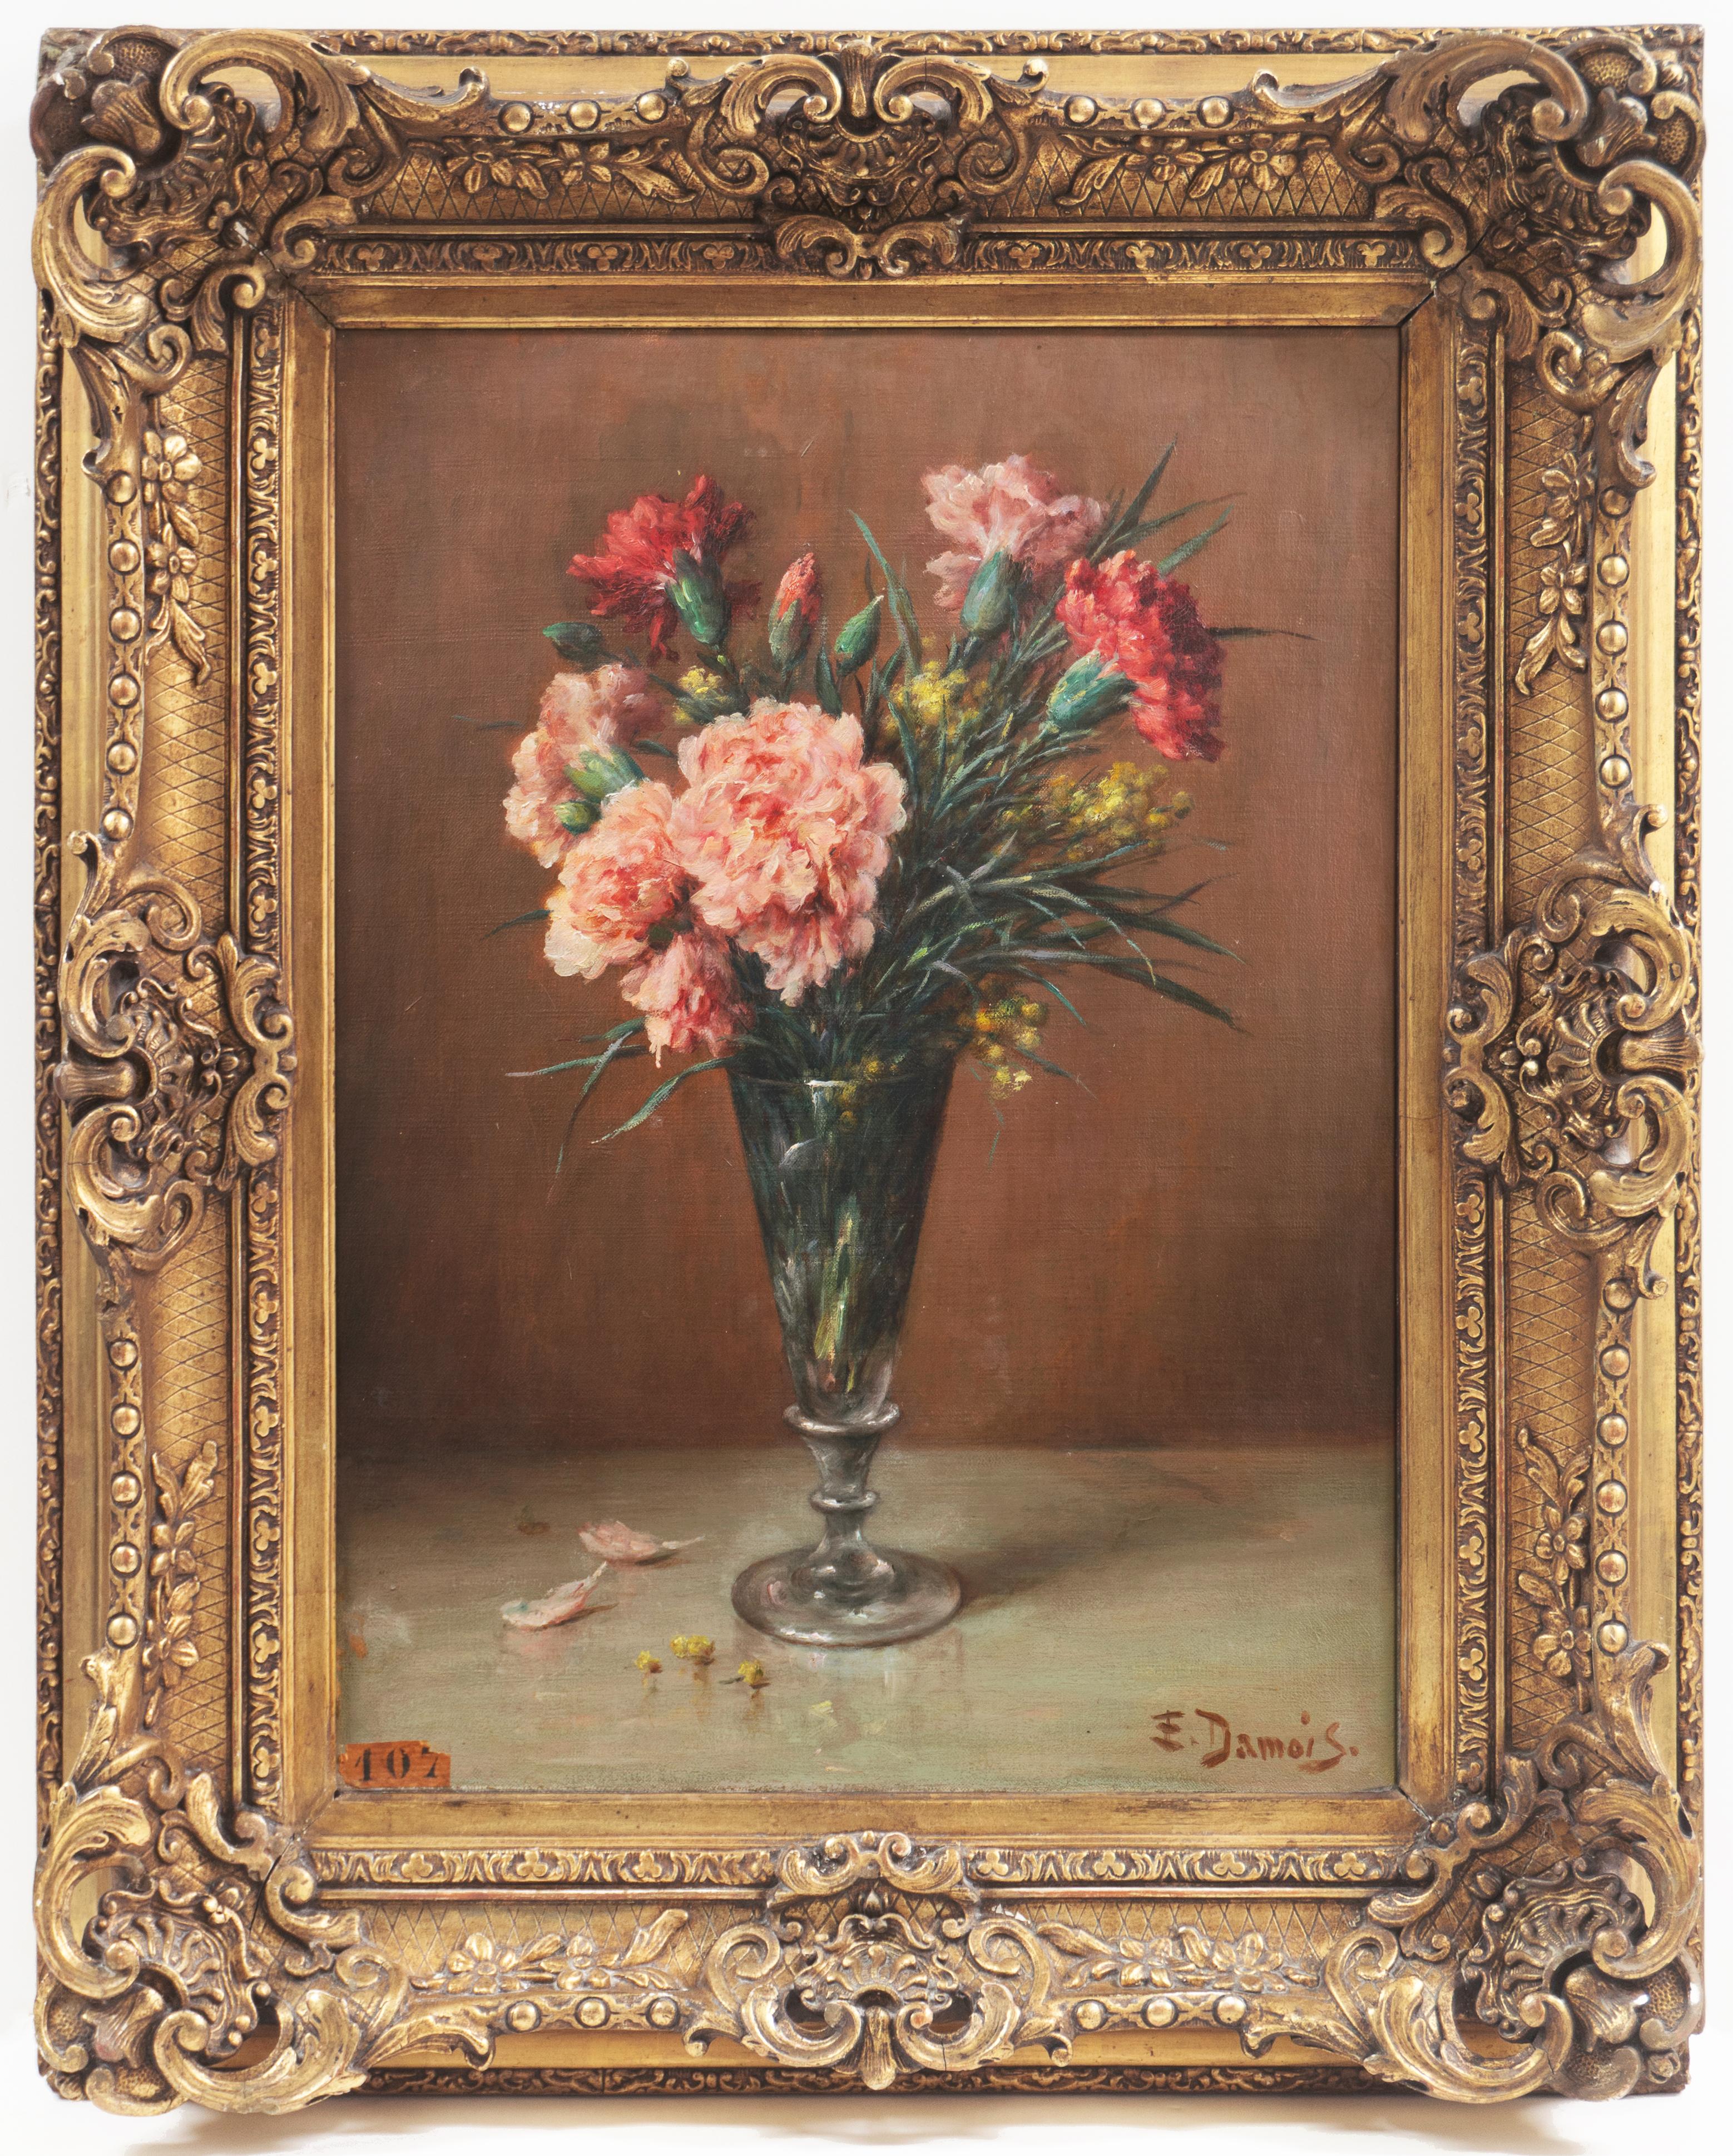 Ernest Emile Damois Still-Life Painting - 'Pink and Red Carnations', Floral Oil Still Life, Benezit, Paris Salon 